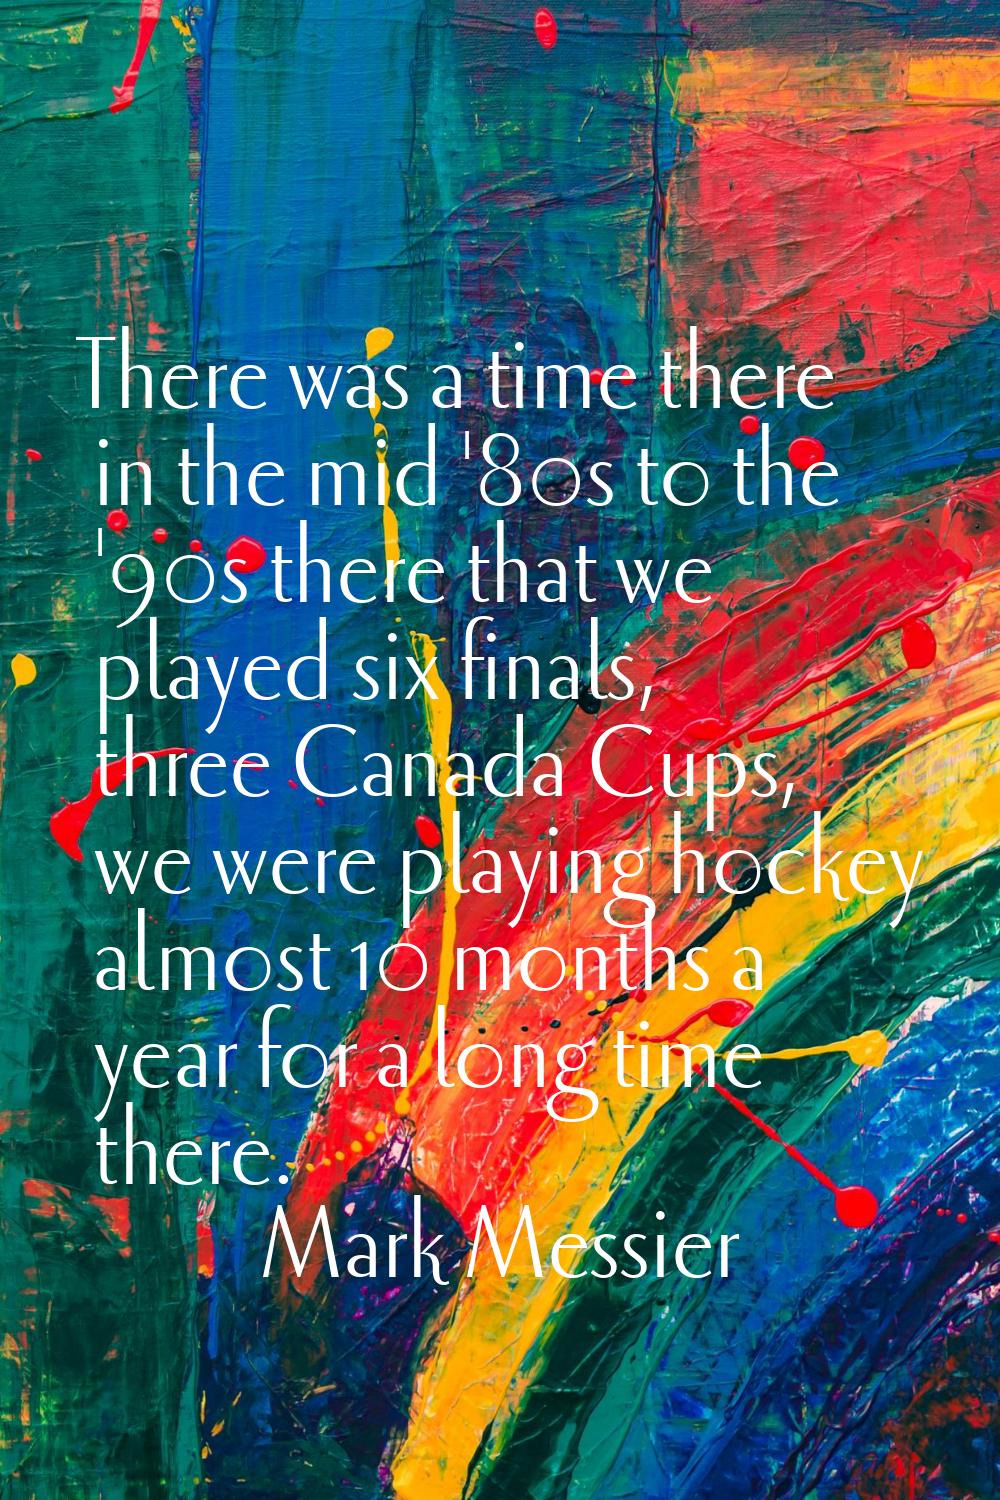 There was a time there in the mid '80s to the '90s there that we played six finals, three Canada Cu